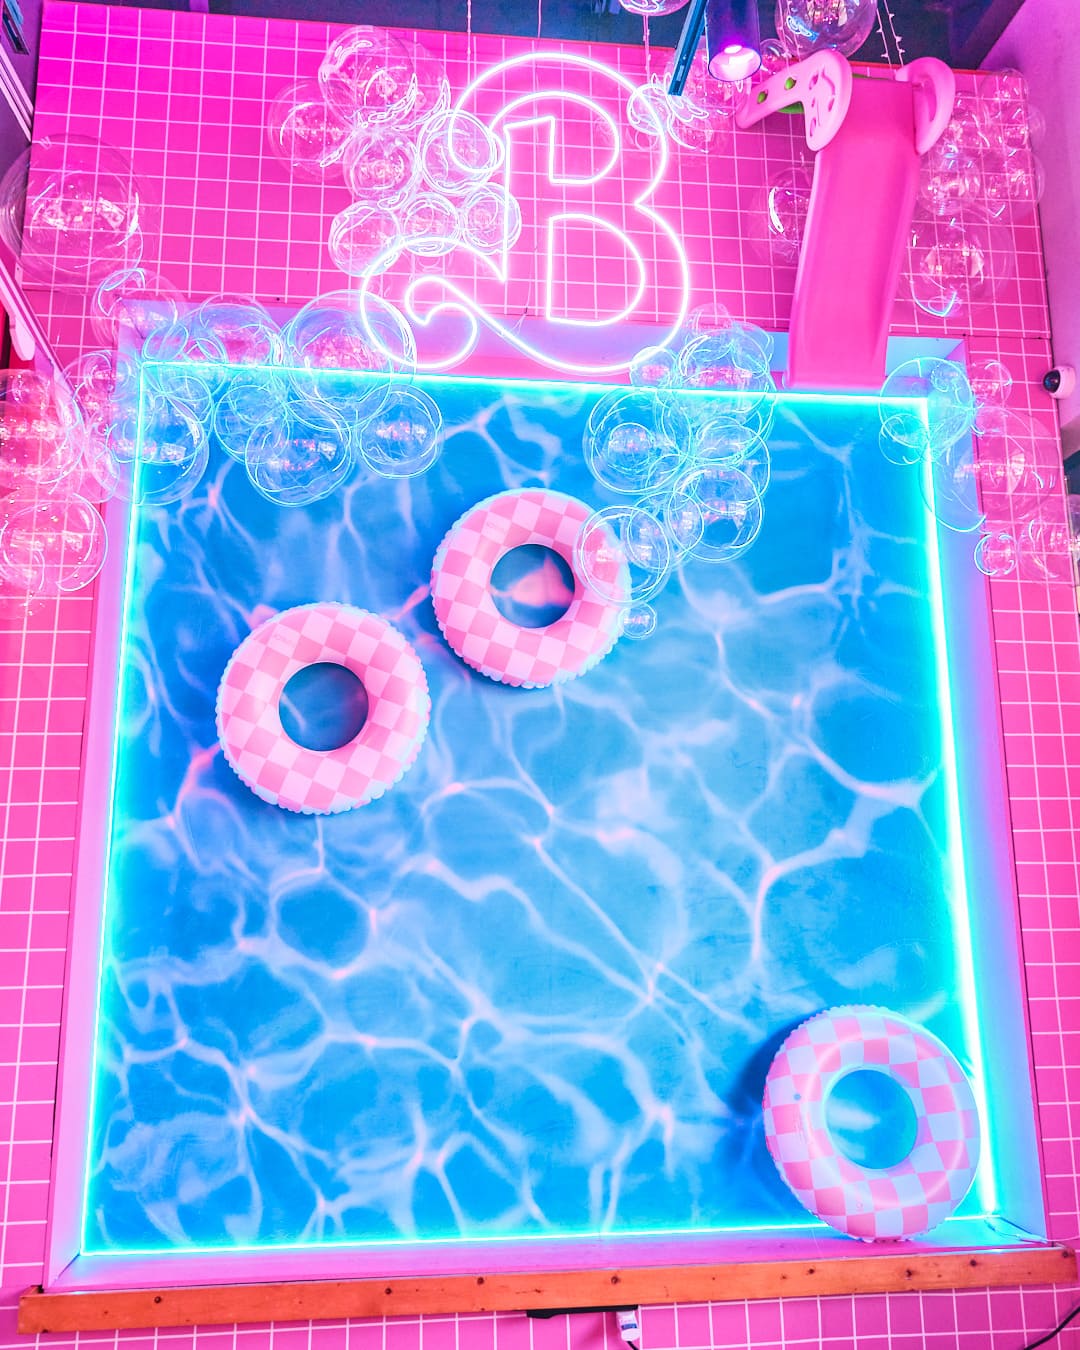 Barbie-inspired poolside photo-op wall. Wall has pink tile and fake pool decor.